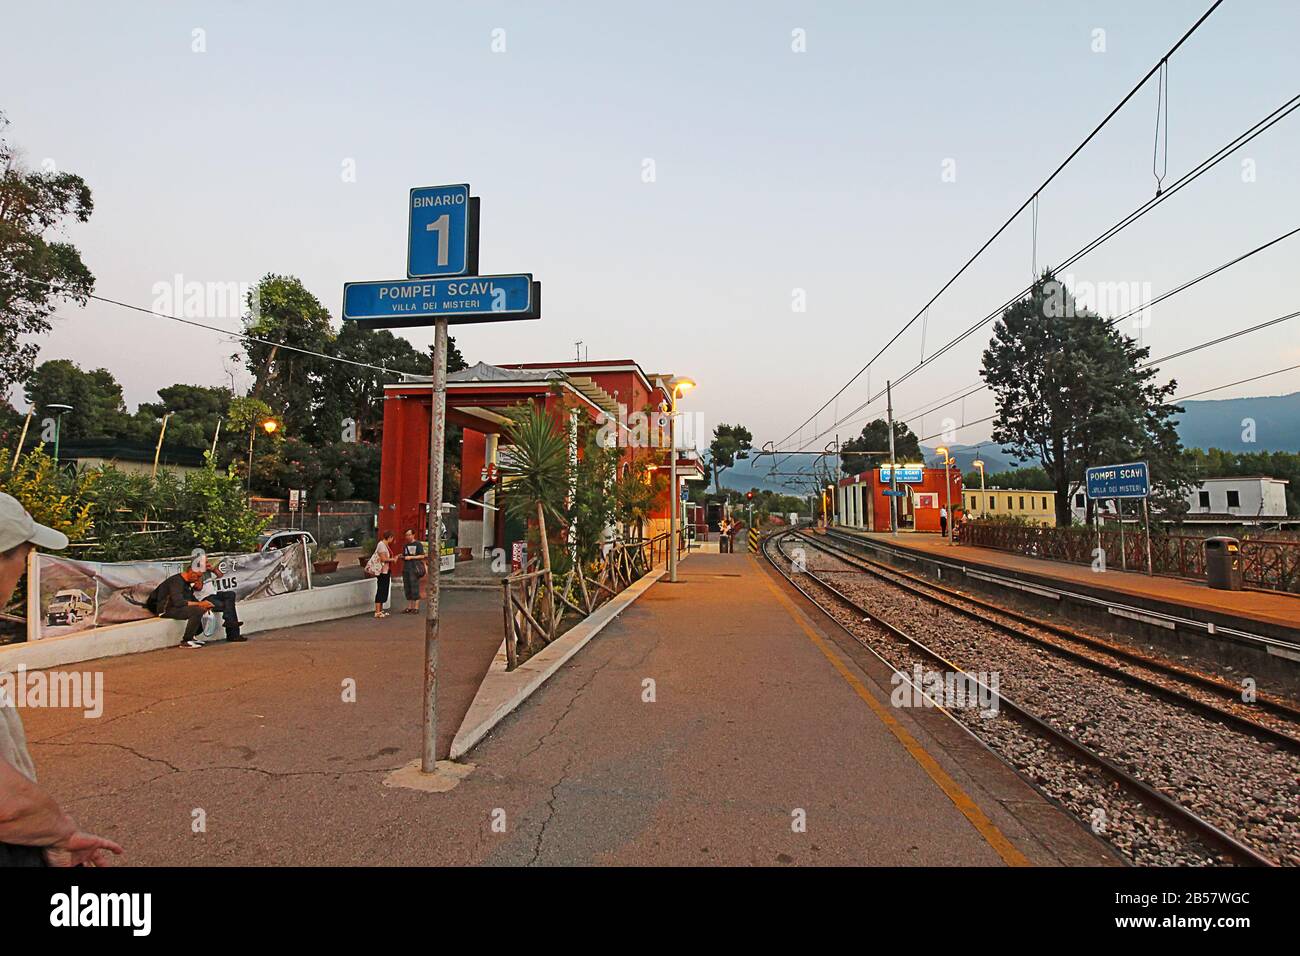 Pompei Scavi station on the Circumvesuviana train line near Naples, Italy. This train line is the primary access to the ruins. Stock Photo